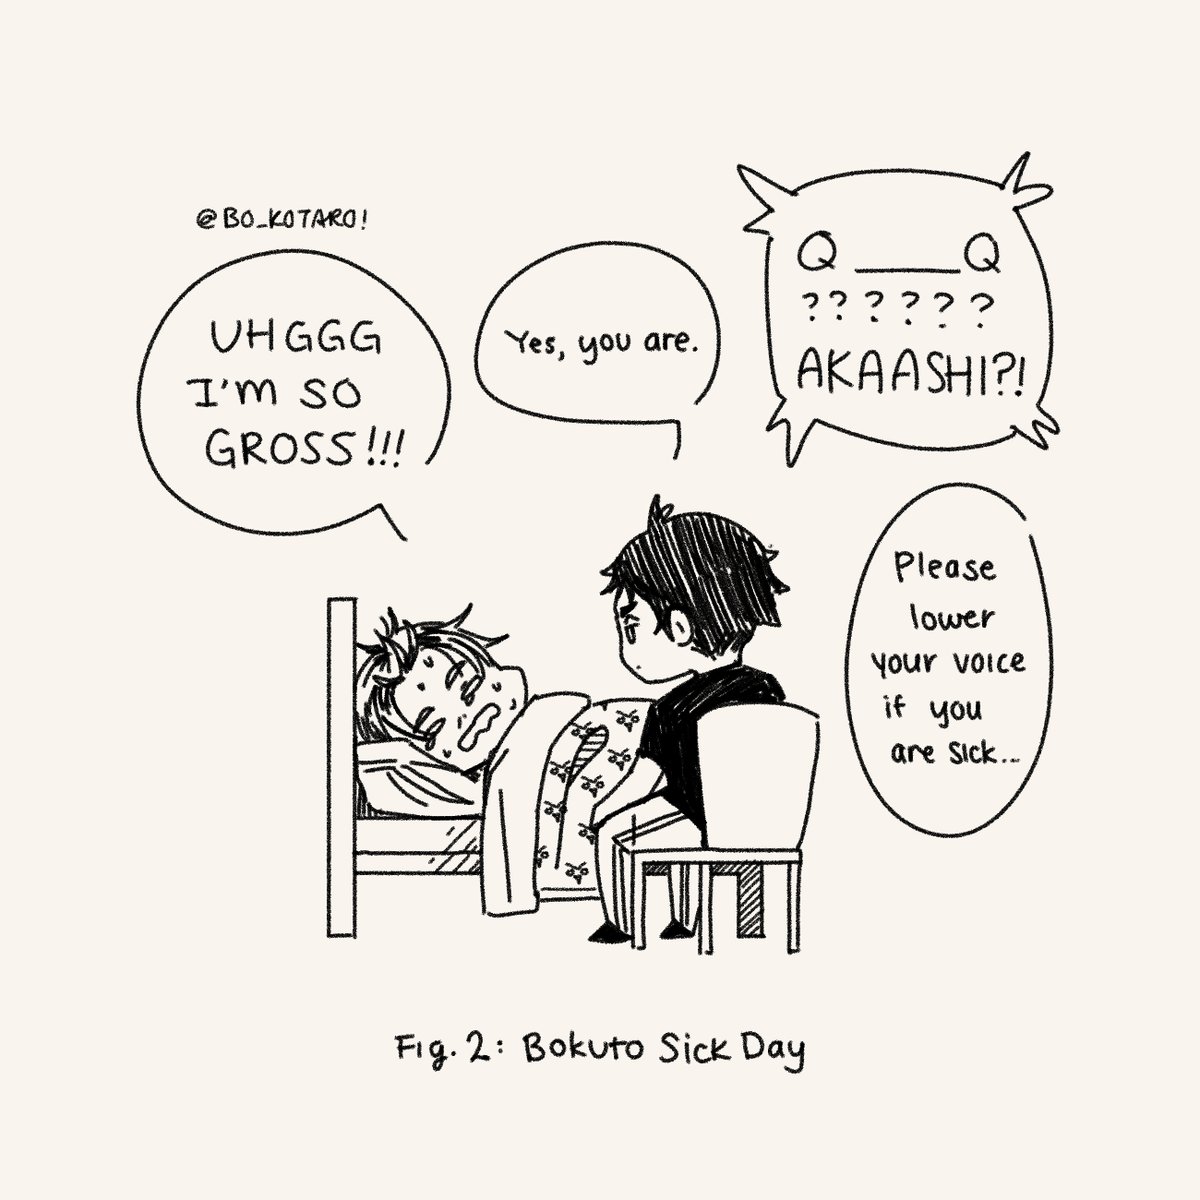 #BOKUAKAWEEK DAY 7 I WISH AKAASHI COULD BE A LITTLE LESS BLUNT DURING MY DAYS OF SUFFERING!! LOOK!! I AM ALWAYS SO NICE TO HIM :C 